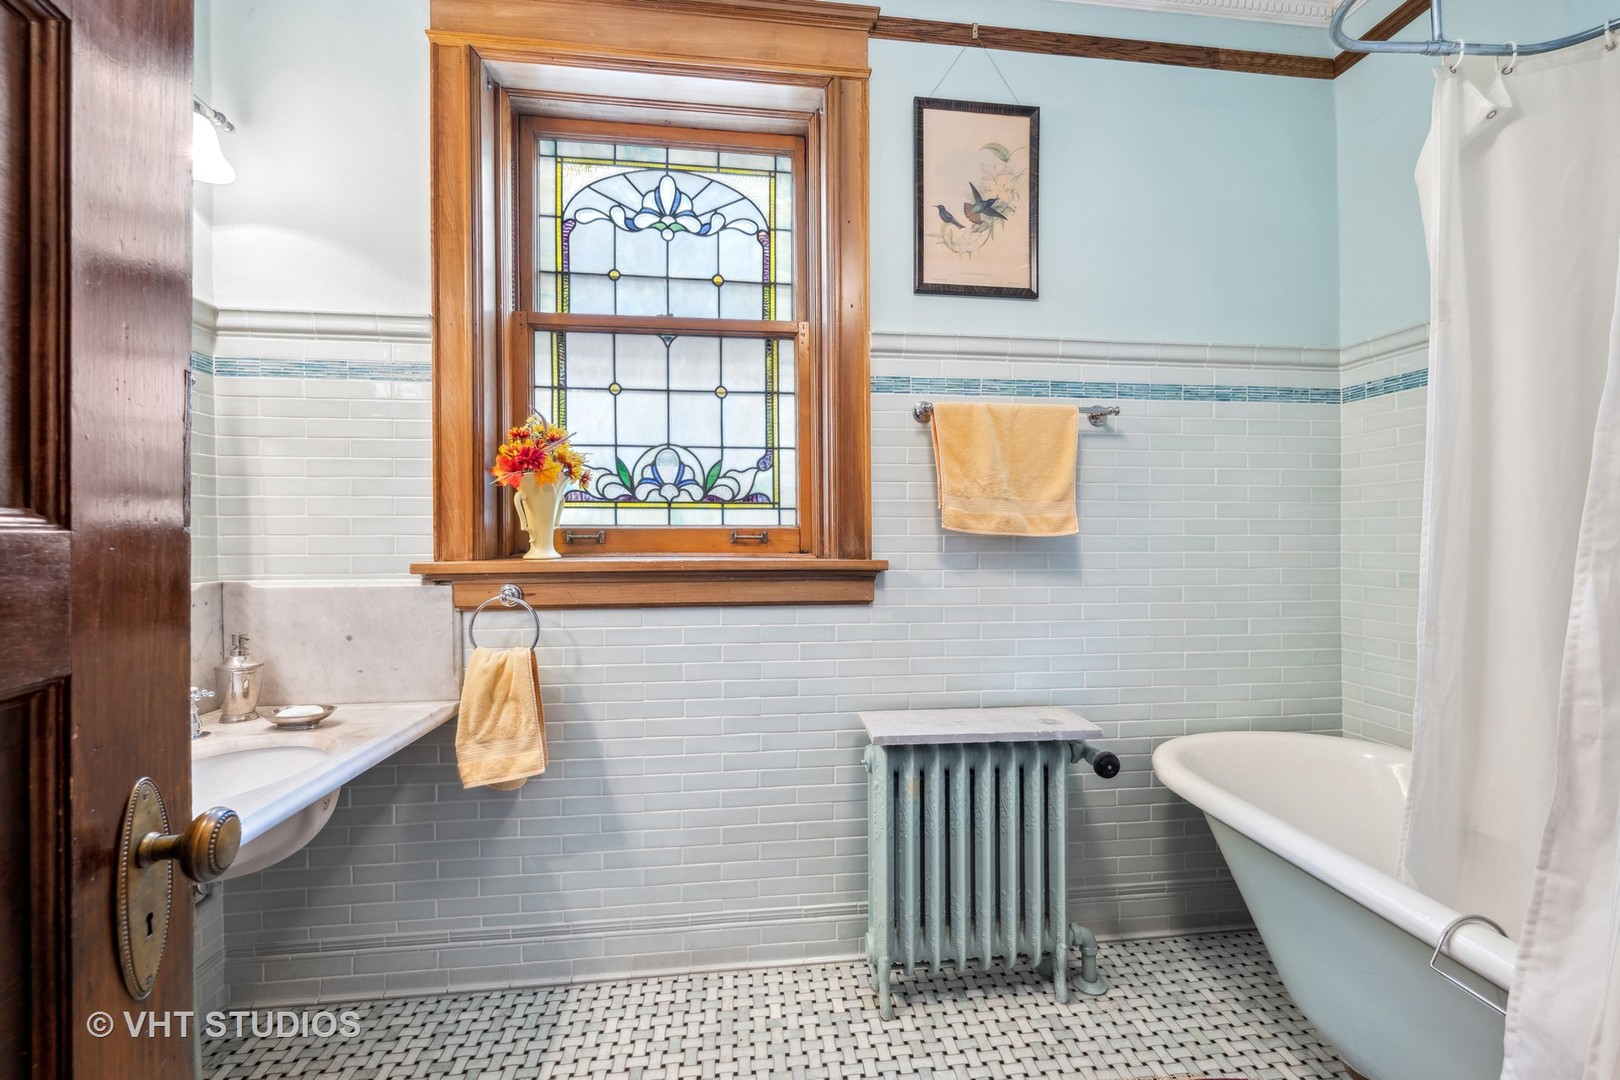 627 W Melrose Street, Chicago, Illinois, 60657, United States, 8 Bedrooms Bedrooms, ,8 BathroomsBathrooms,Residential,For Sale,627 W Melrose Street,1474120